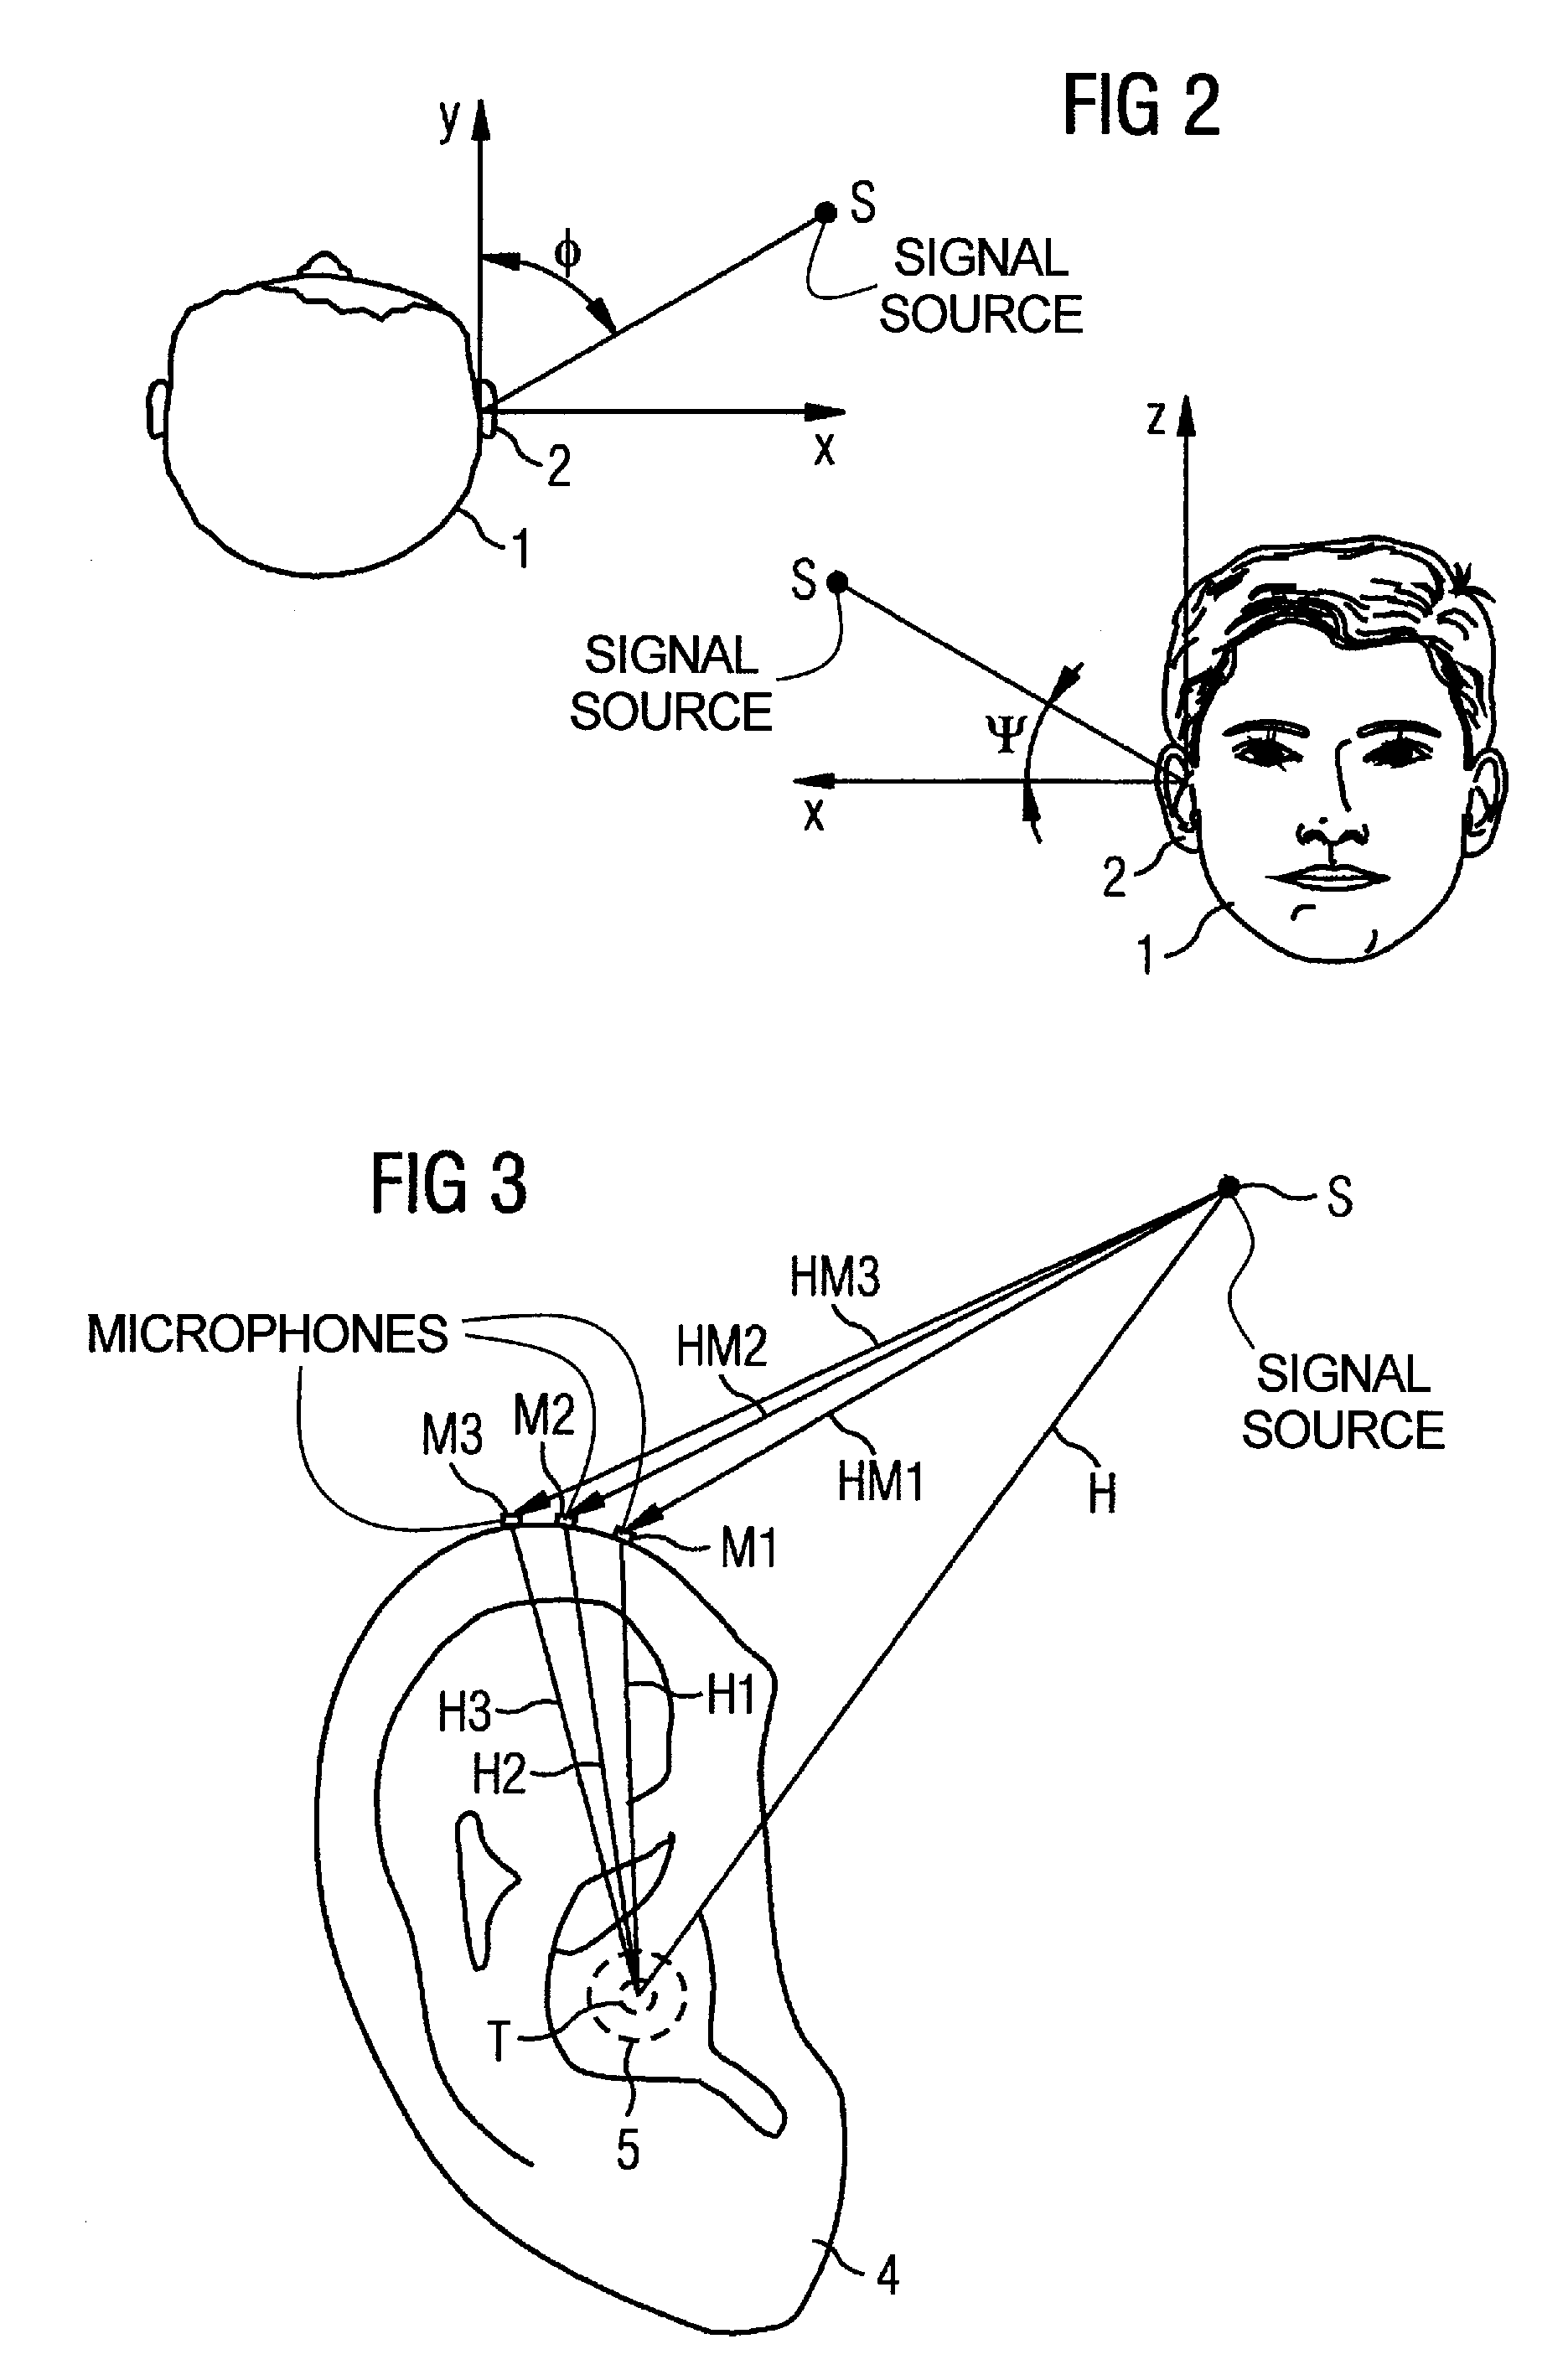 Hearing aid device, and operating and adjustment methods therefor, with microphone disposed outside of the auditory canal